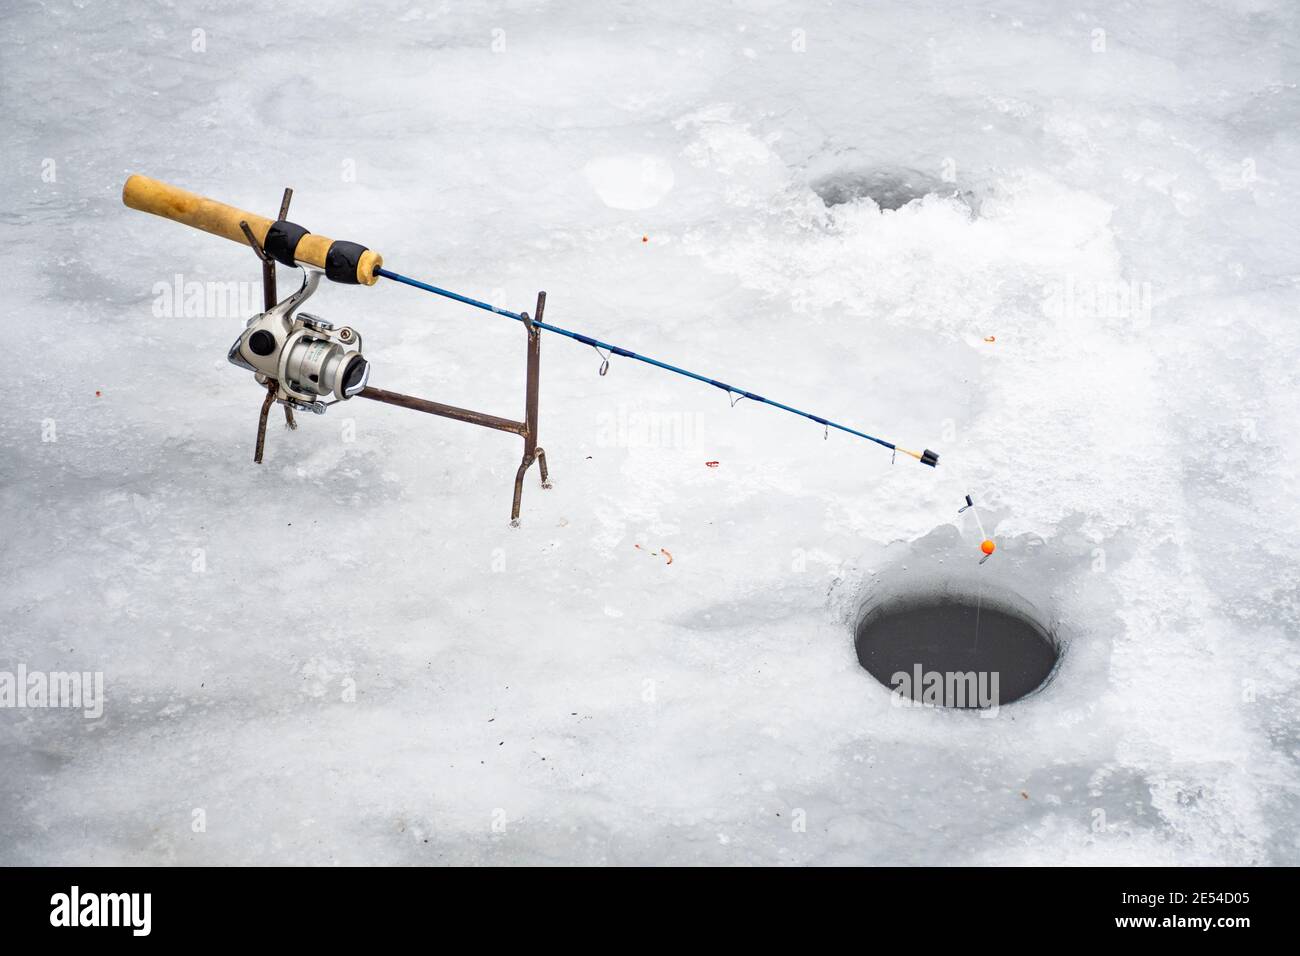 Fishing on a frozen lake in winter with fishing pole or rod, ice